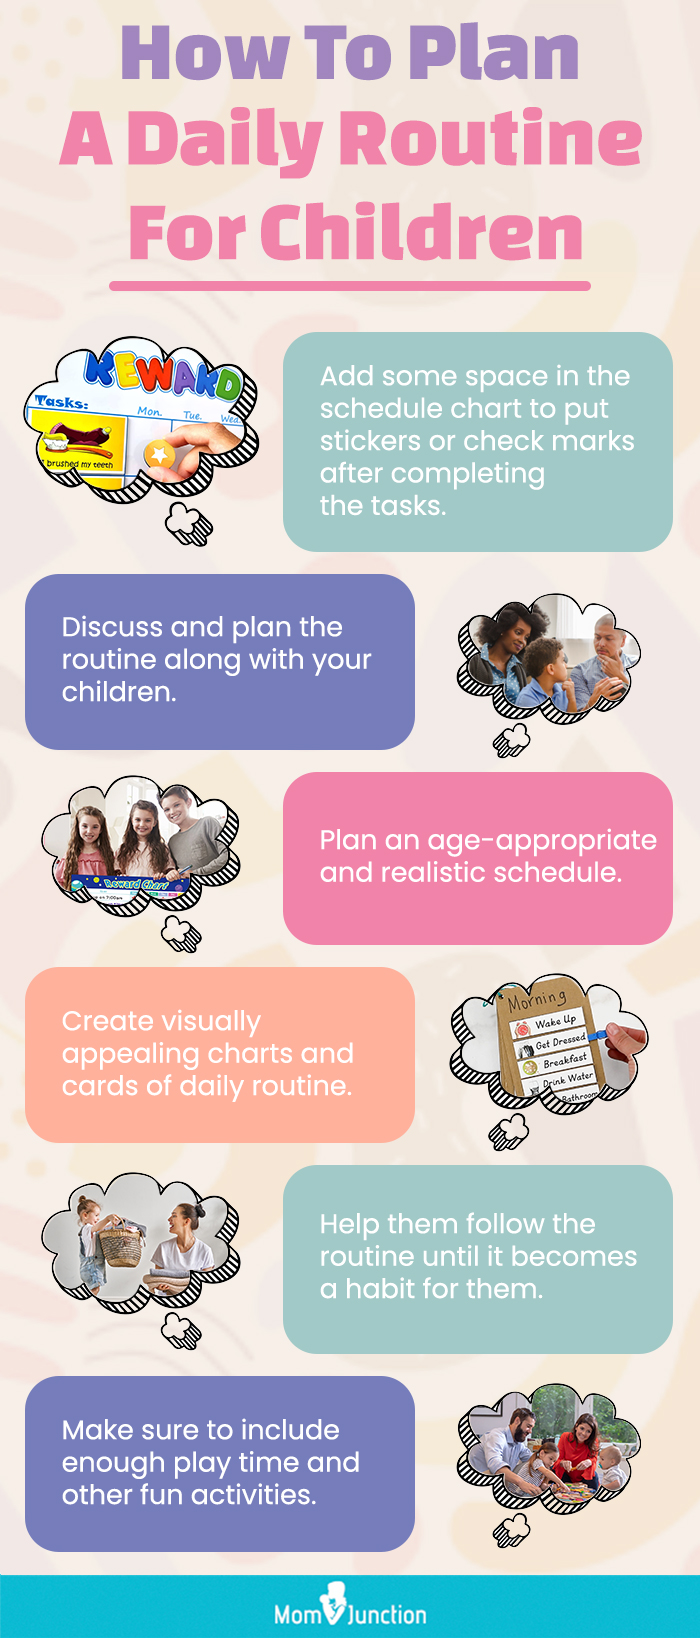 https://www.momjunction.com/wp-content/uploads/2023/05/Infographic-Quick-Tips-To-Make-A-Daily-Routine-For-Children-.jpg